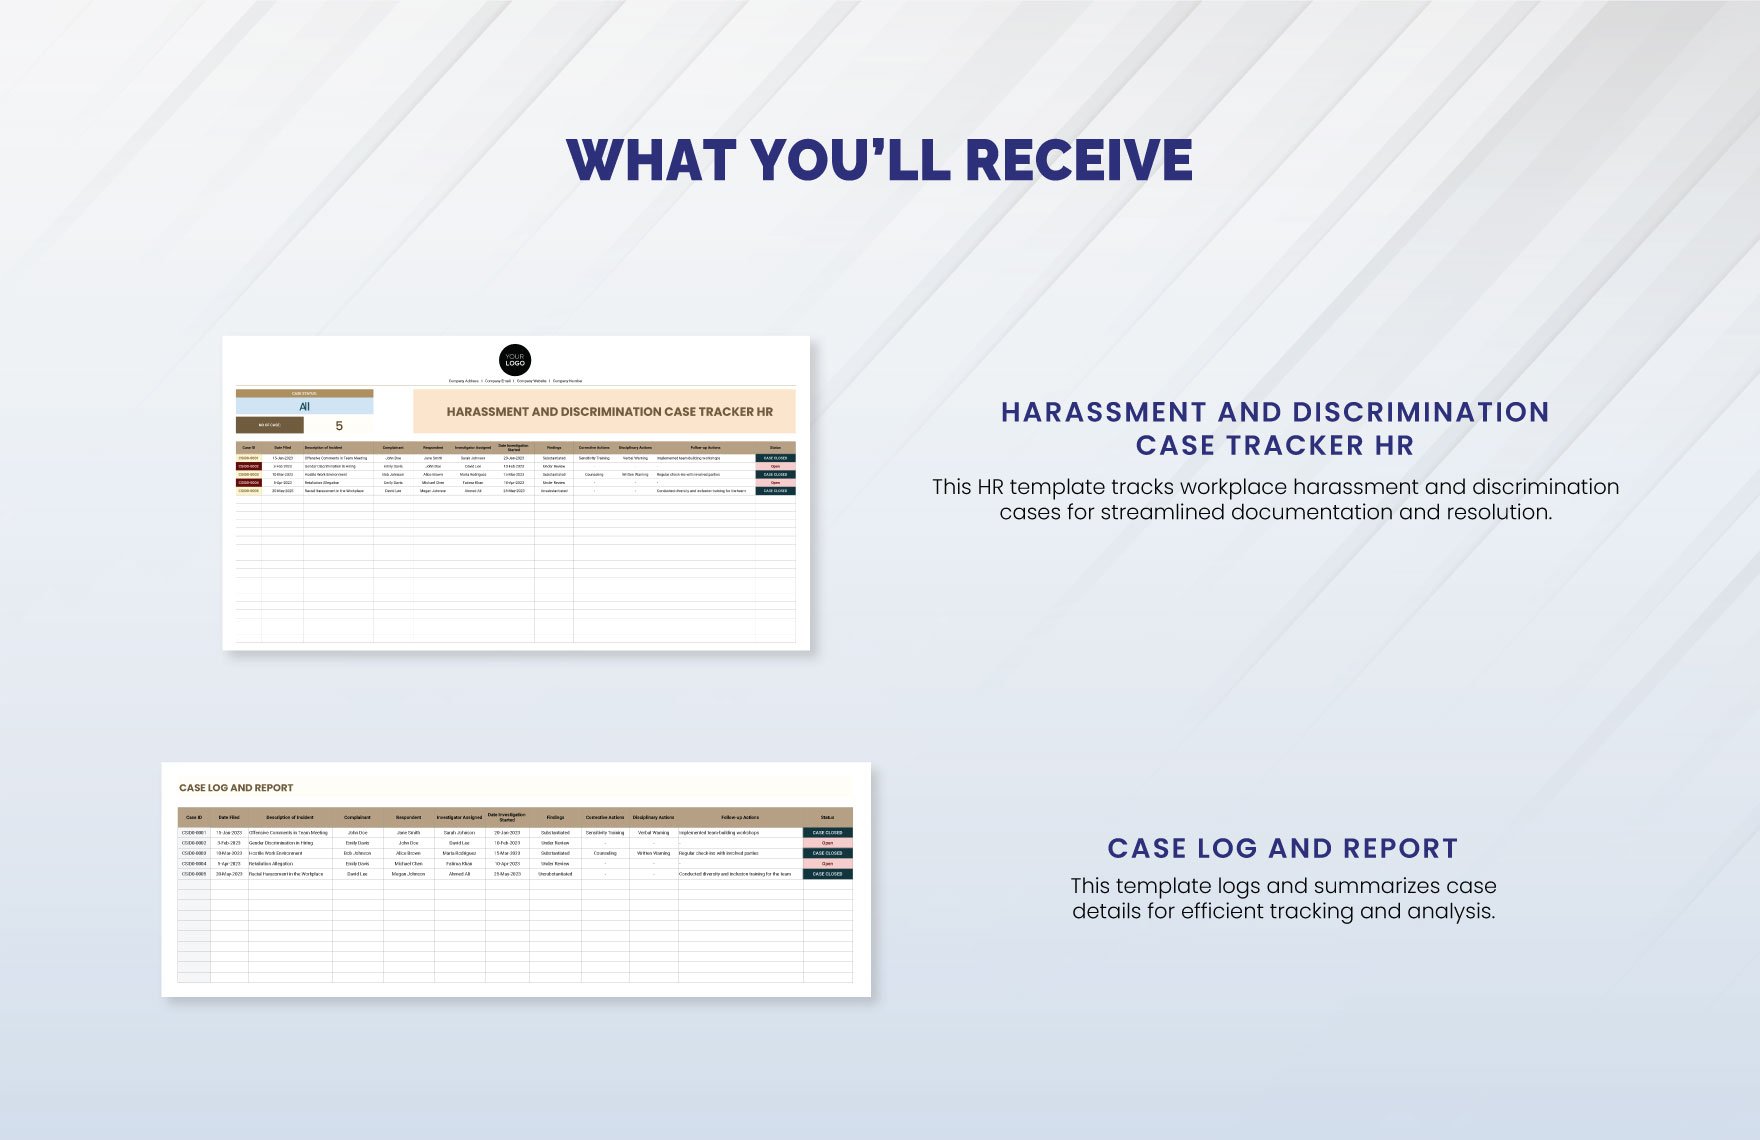 Harassment and Discrimination Case Tracker HR Template